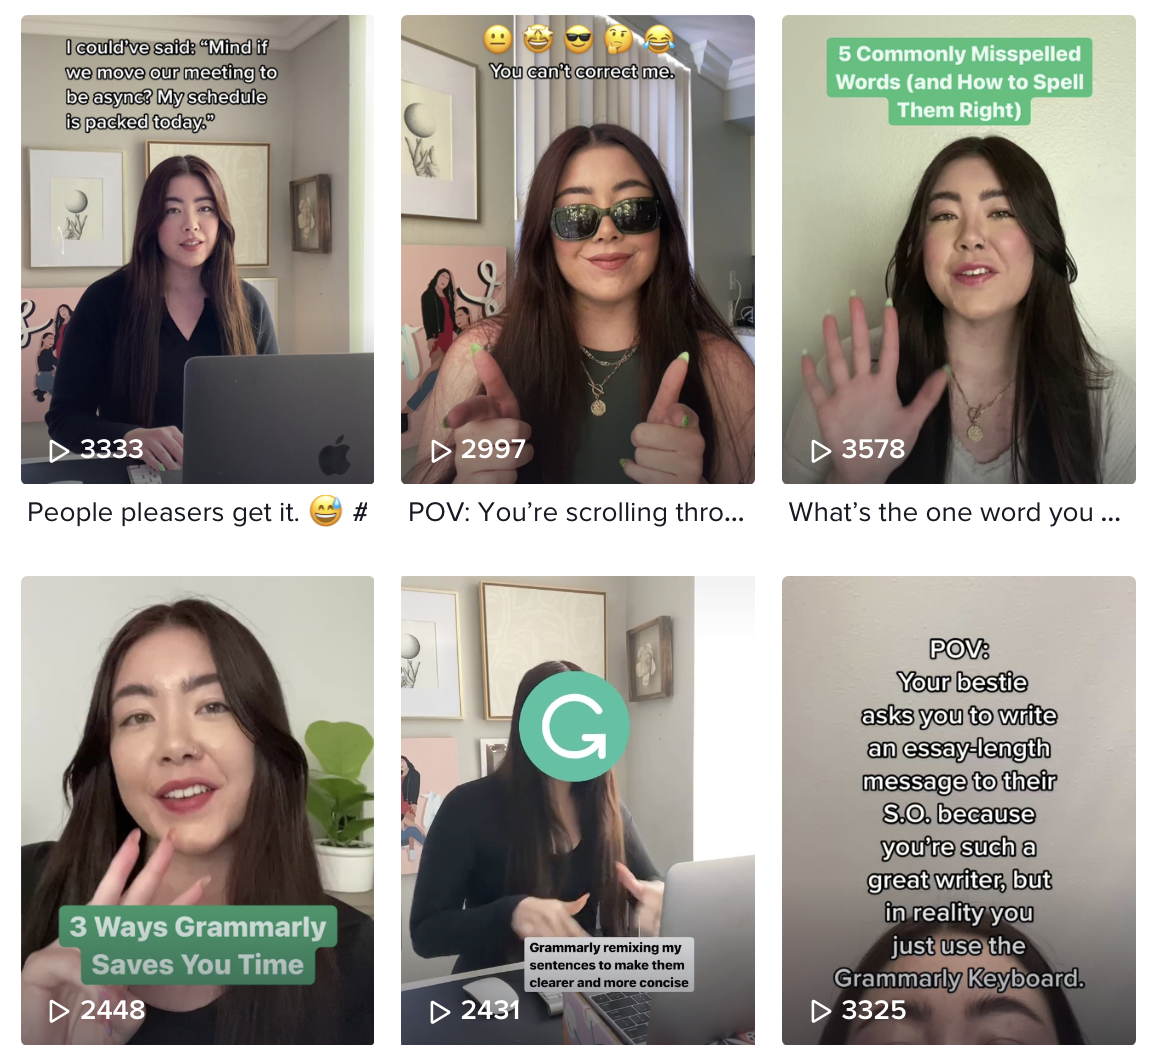 Here you can see how Grammarly uses TikTok for B2B marketing